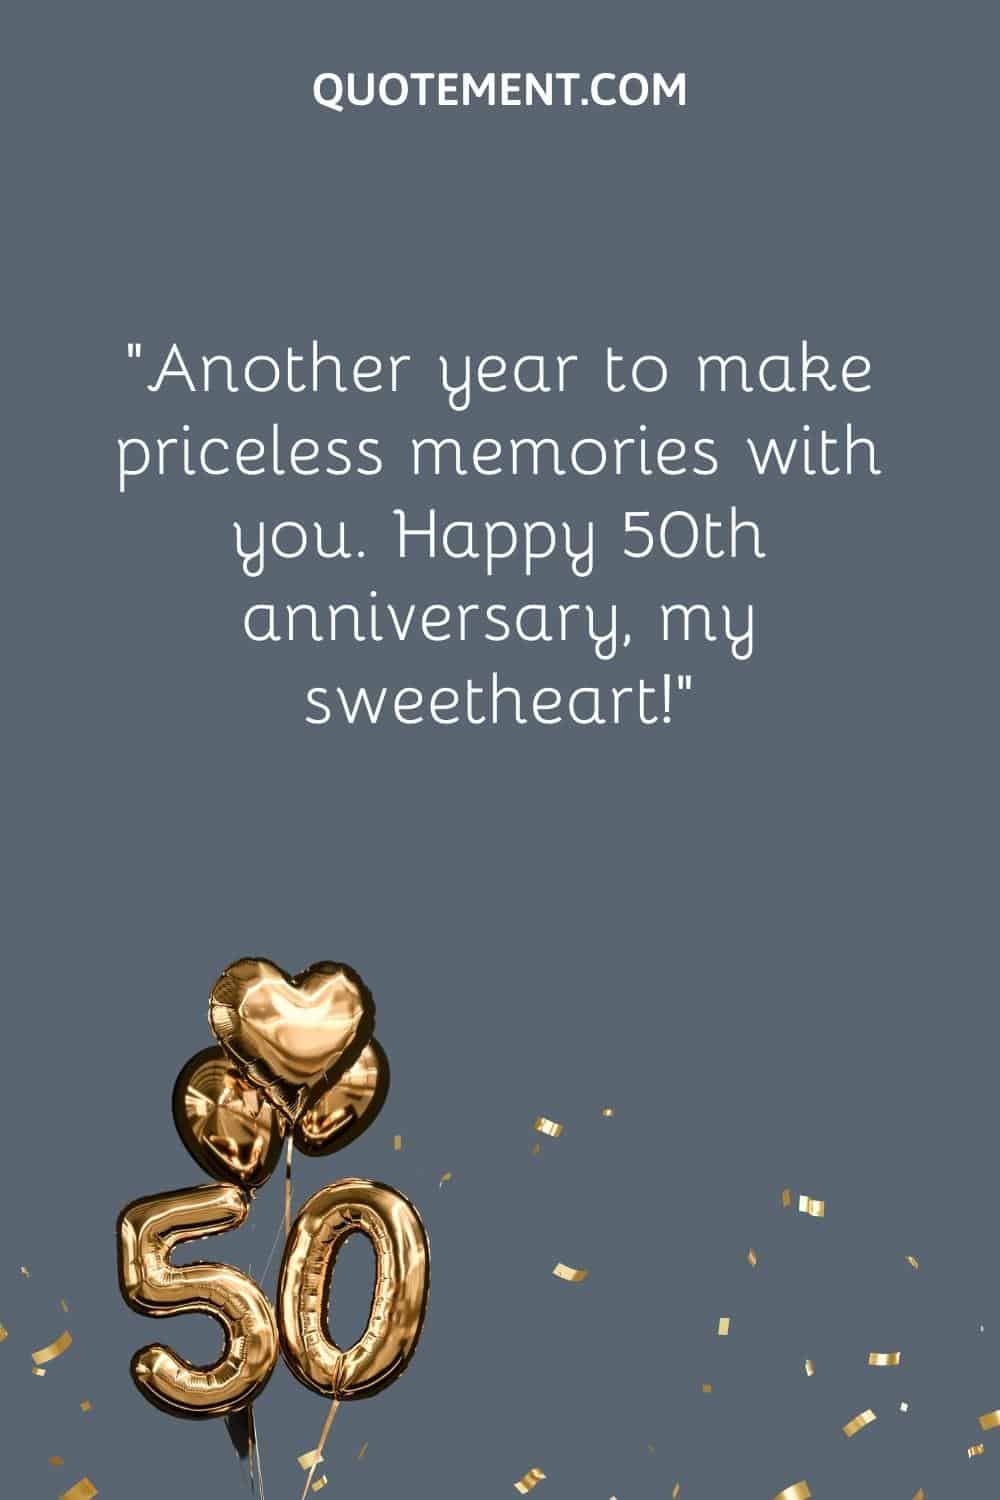 “Another year to make priceless memories with you. Happy 50th anniversary, my sweetheart!”